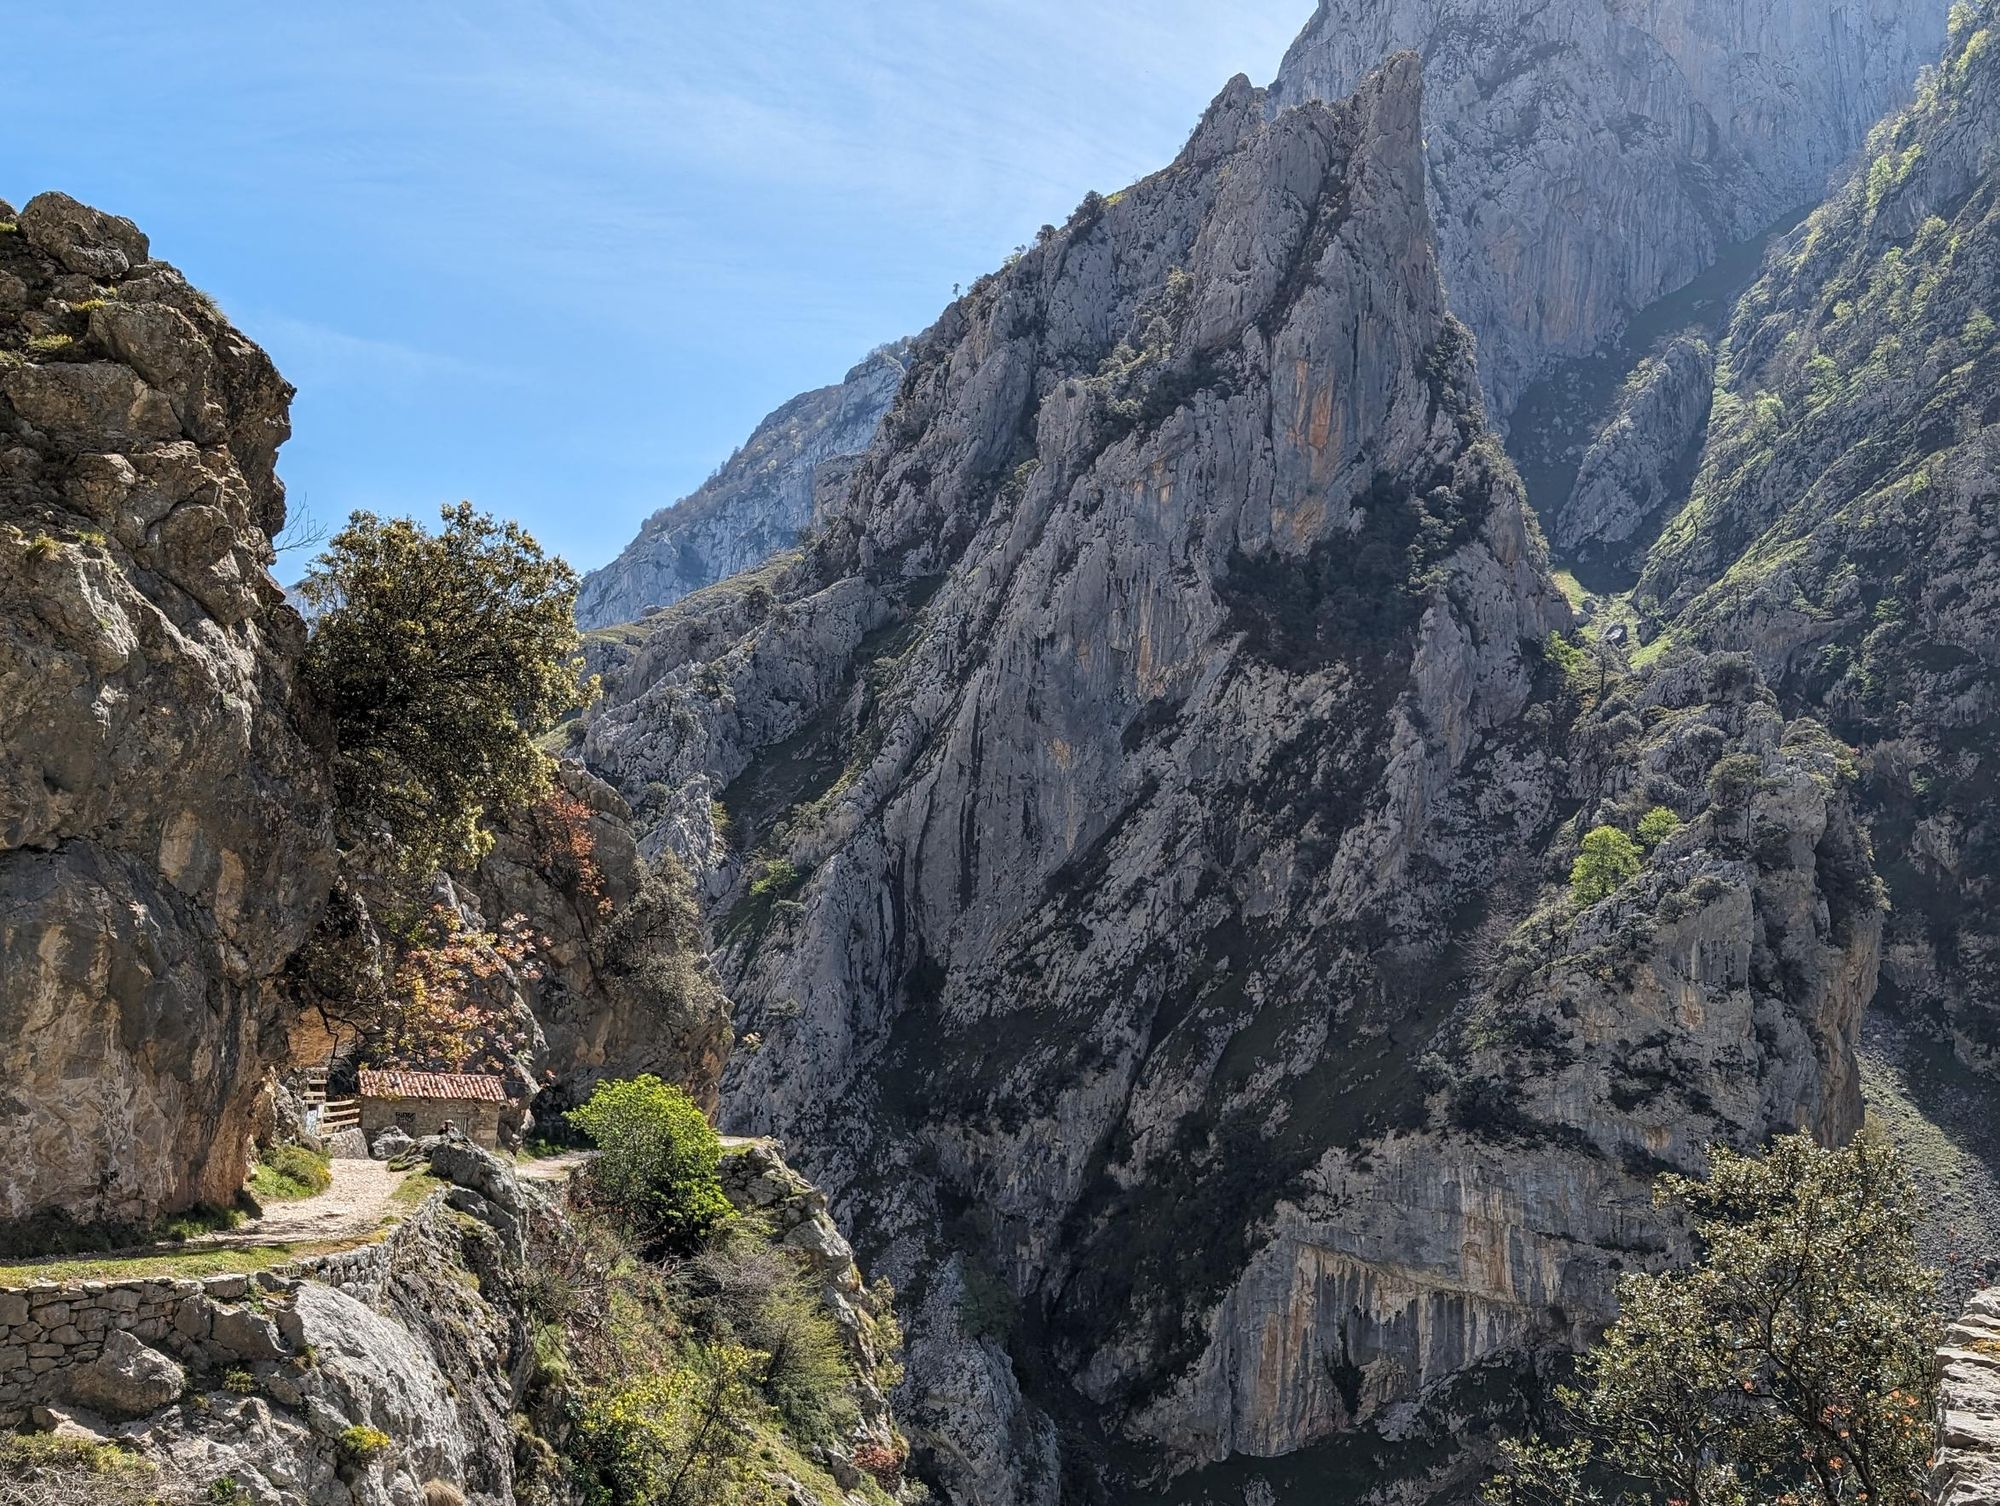 Jagged limestone peaks reach up and shape the route throughout the hike. Photo: Stuart Kenny